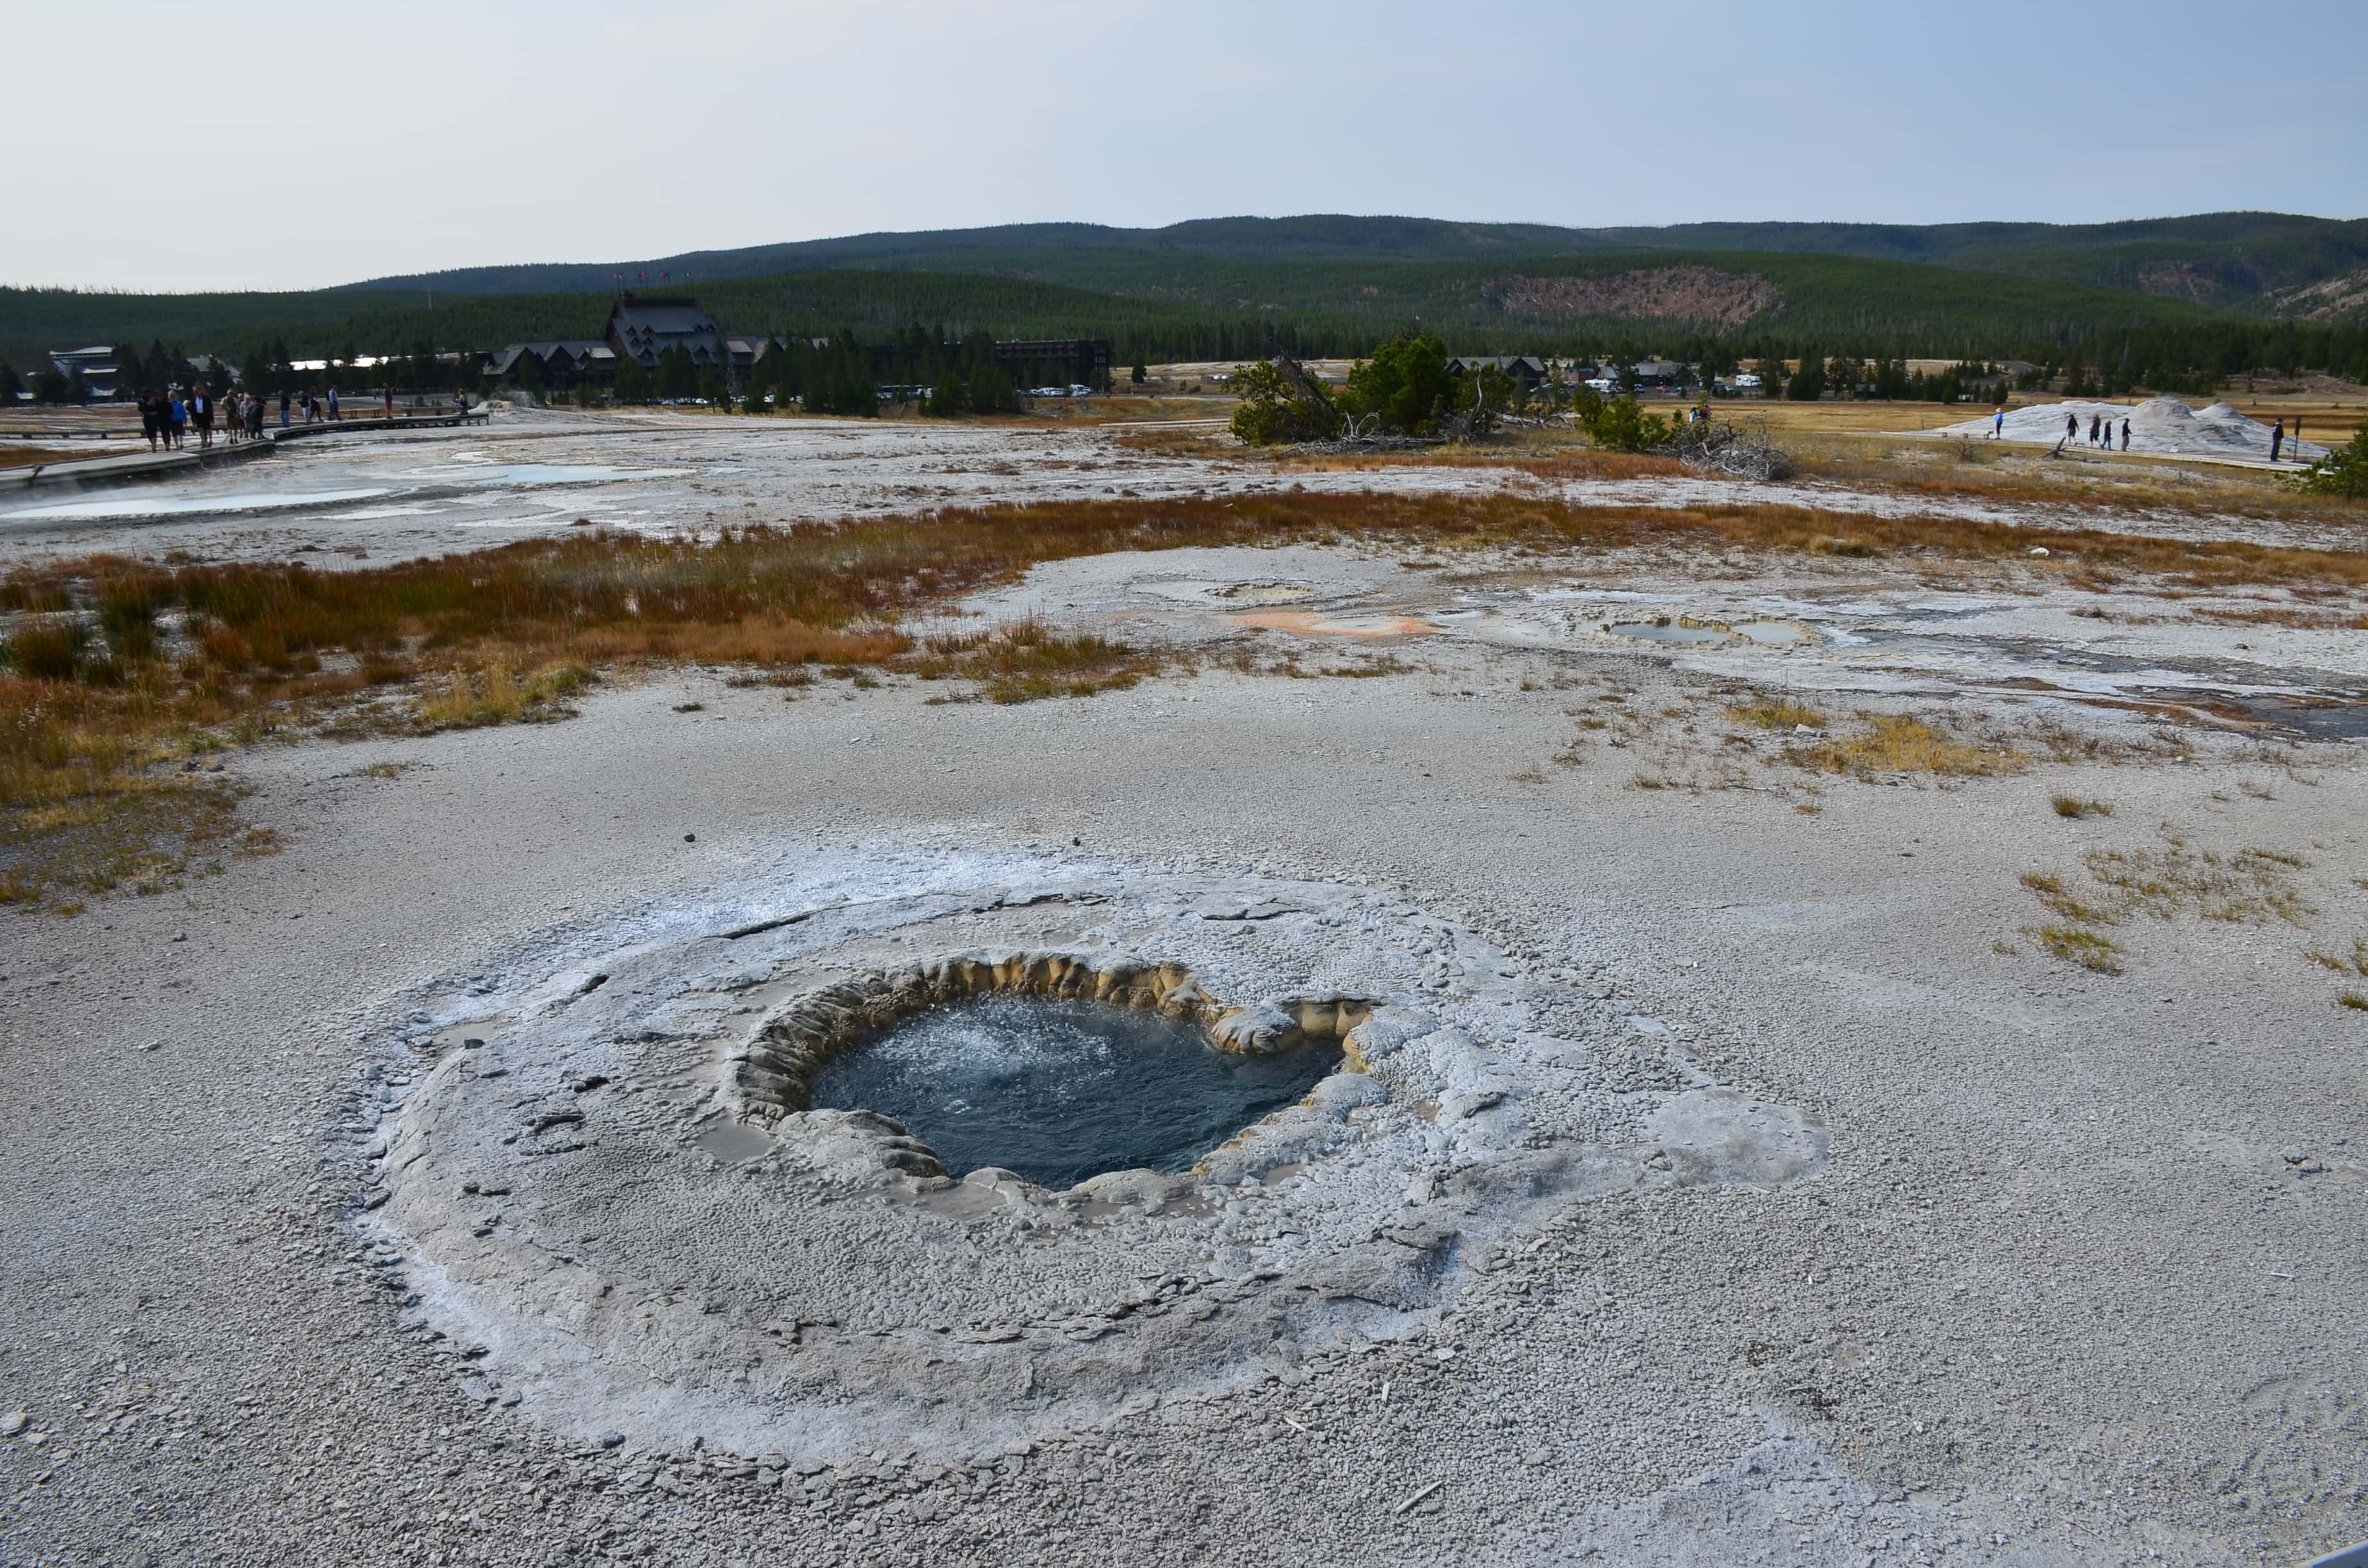 Beach Spring on Geyser Hill at the Upper Geyser Basin in Yellowstone National Park, Wyoming